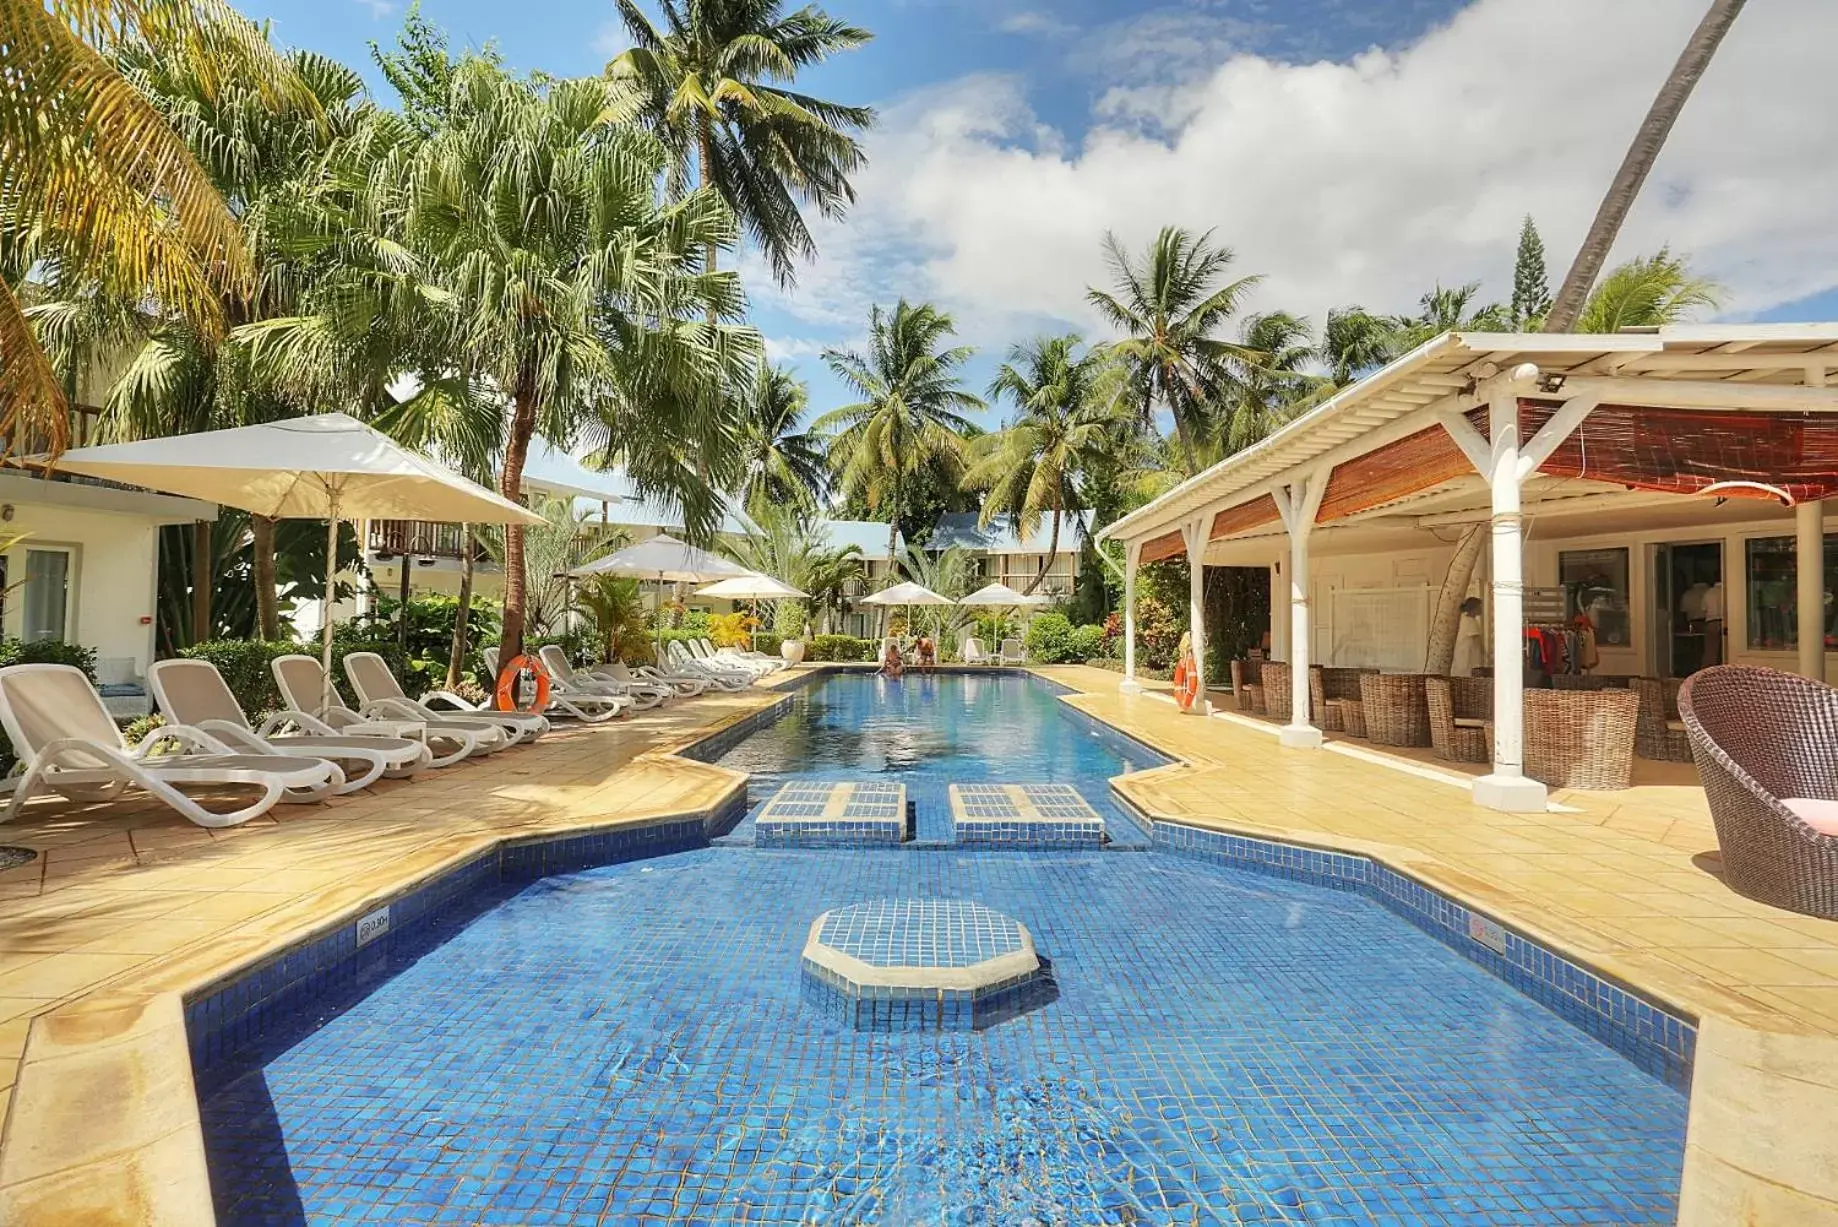 Swimming Pool in Cocotiers Hotel – Mauritius